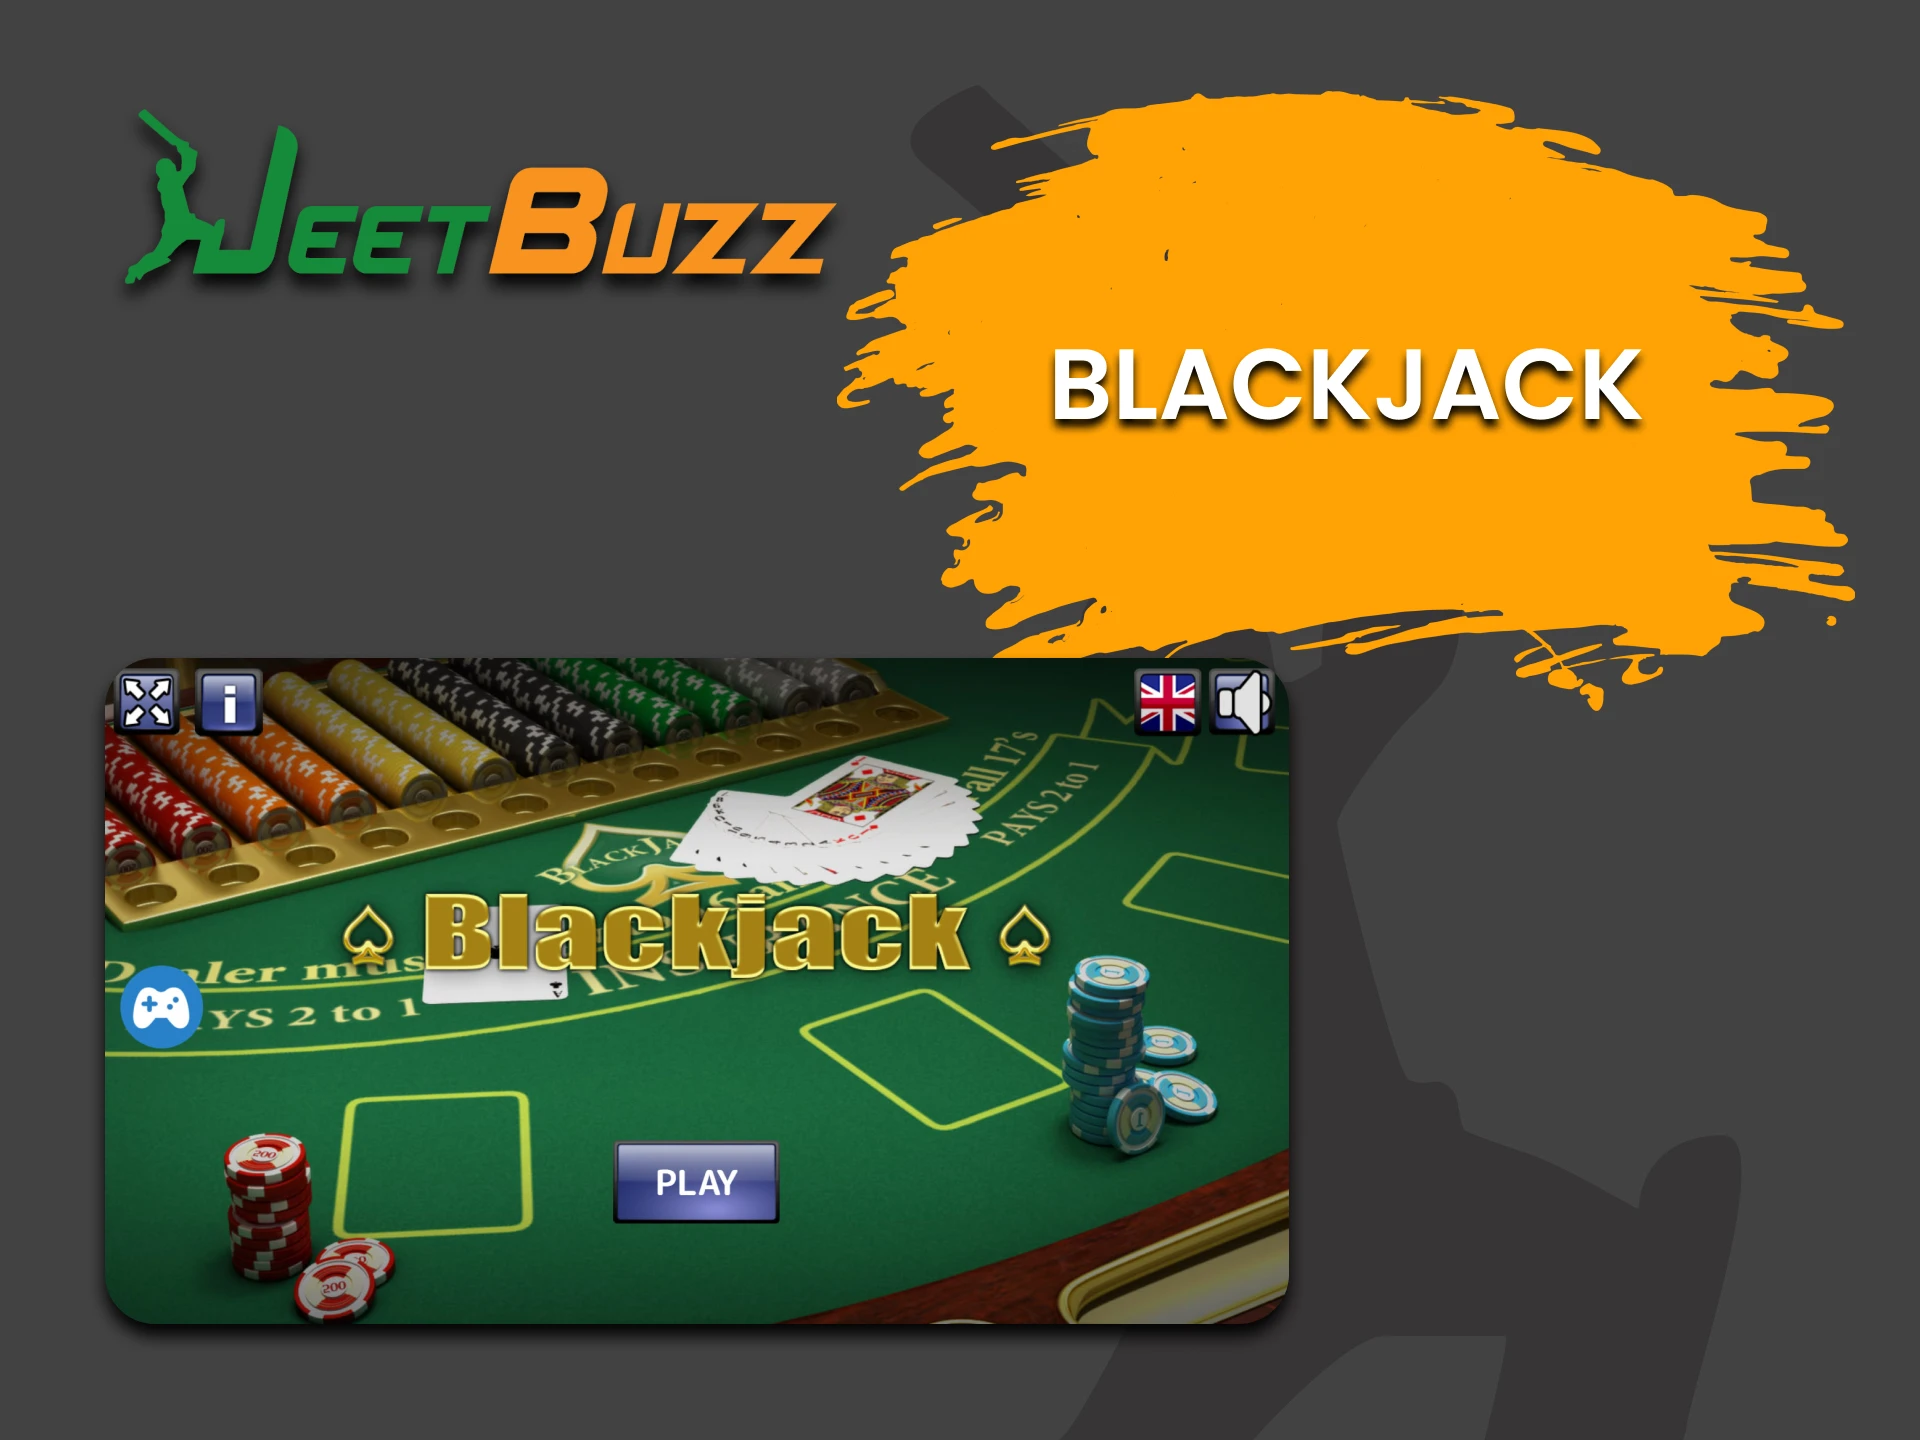 For table games from JeetBuzz, choose Blackjack.